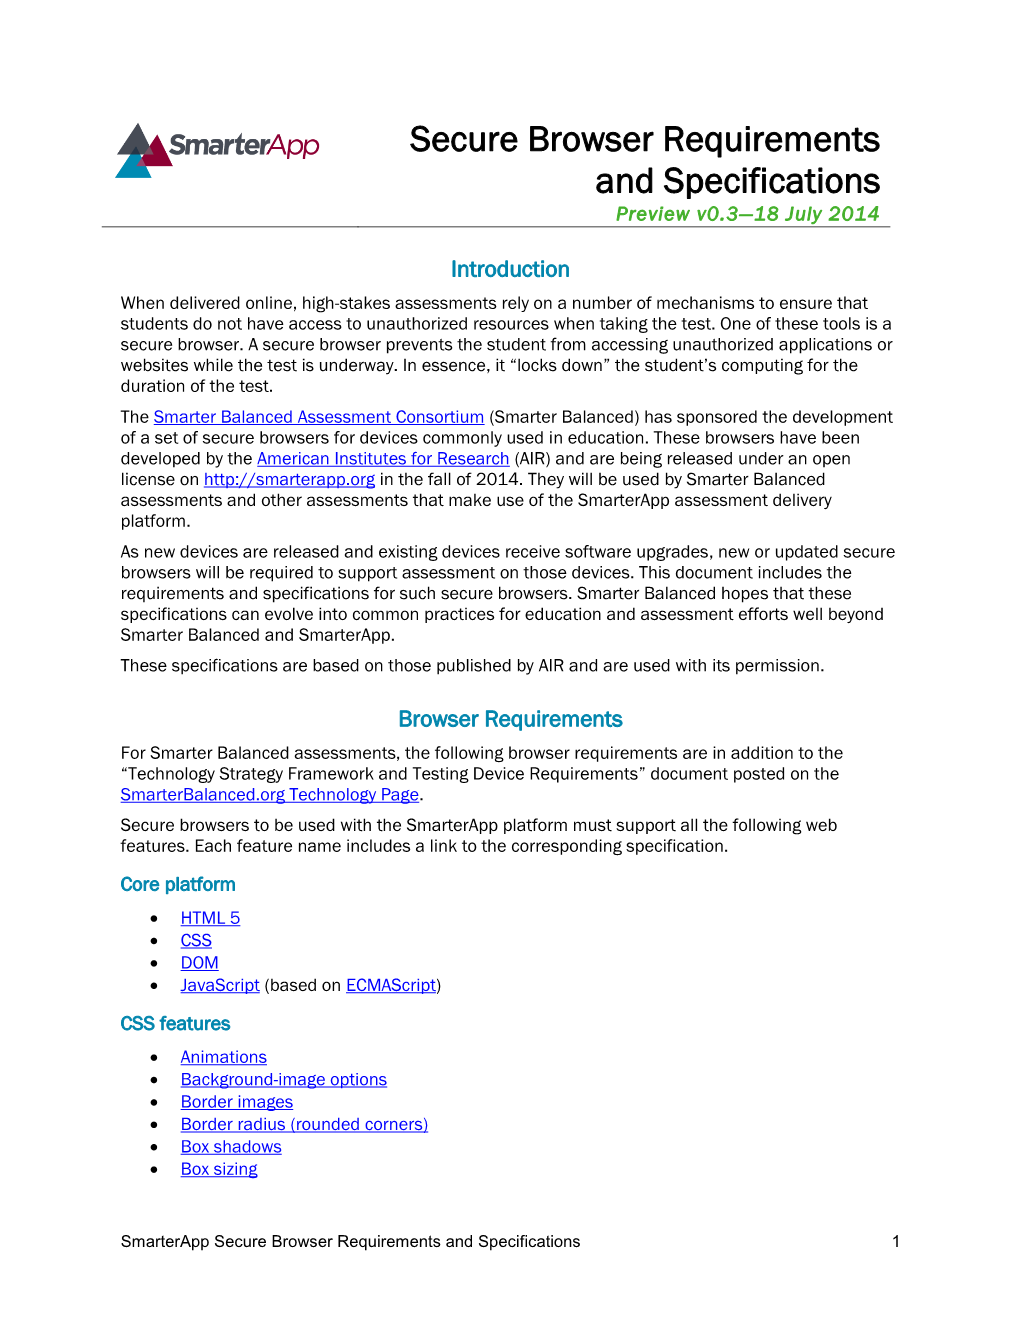 Secure Browser Requirements and Specifications Preview V0.3—18 July 2014